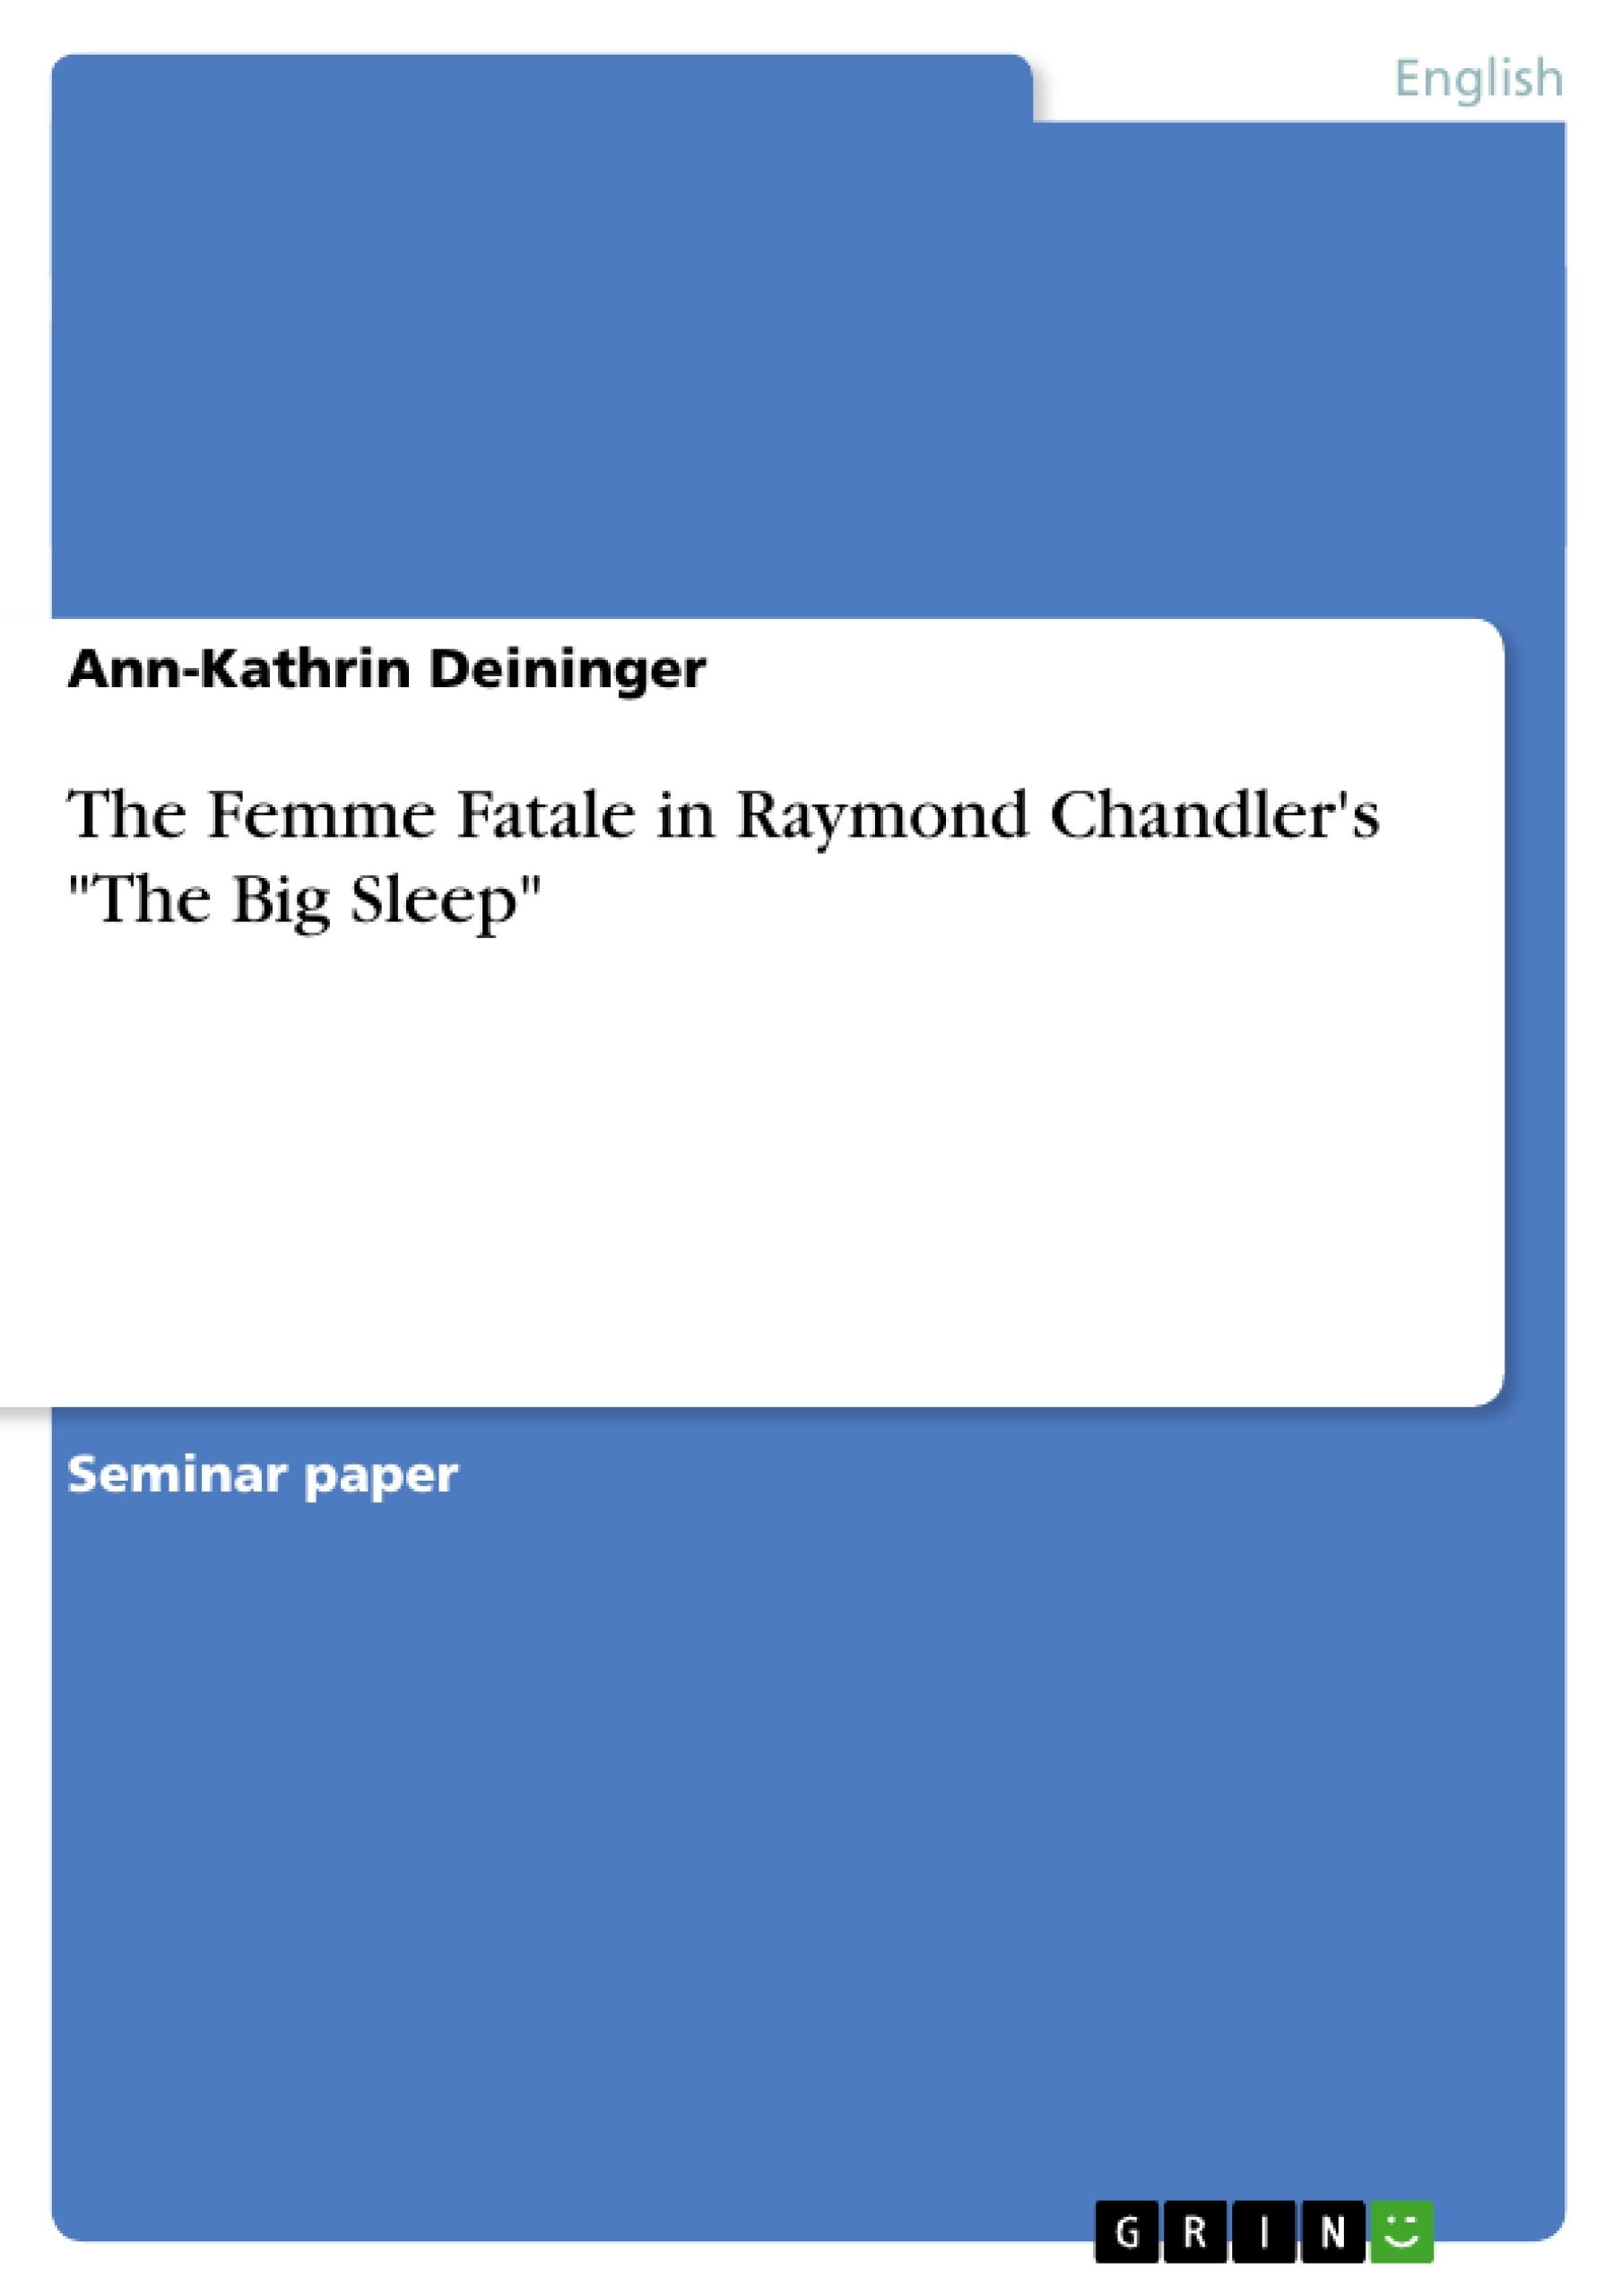 Title: The Femme Fatale in Raymond Chandler's "The Big Sleep"